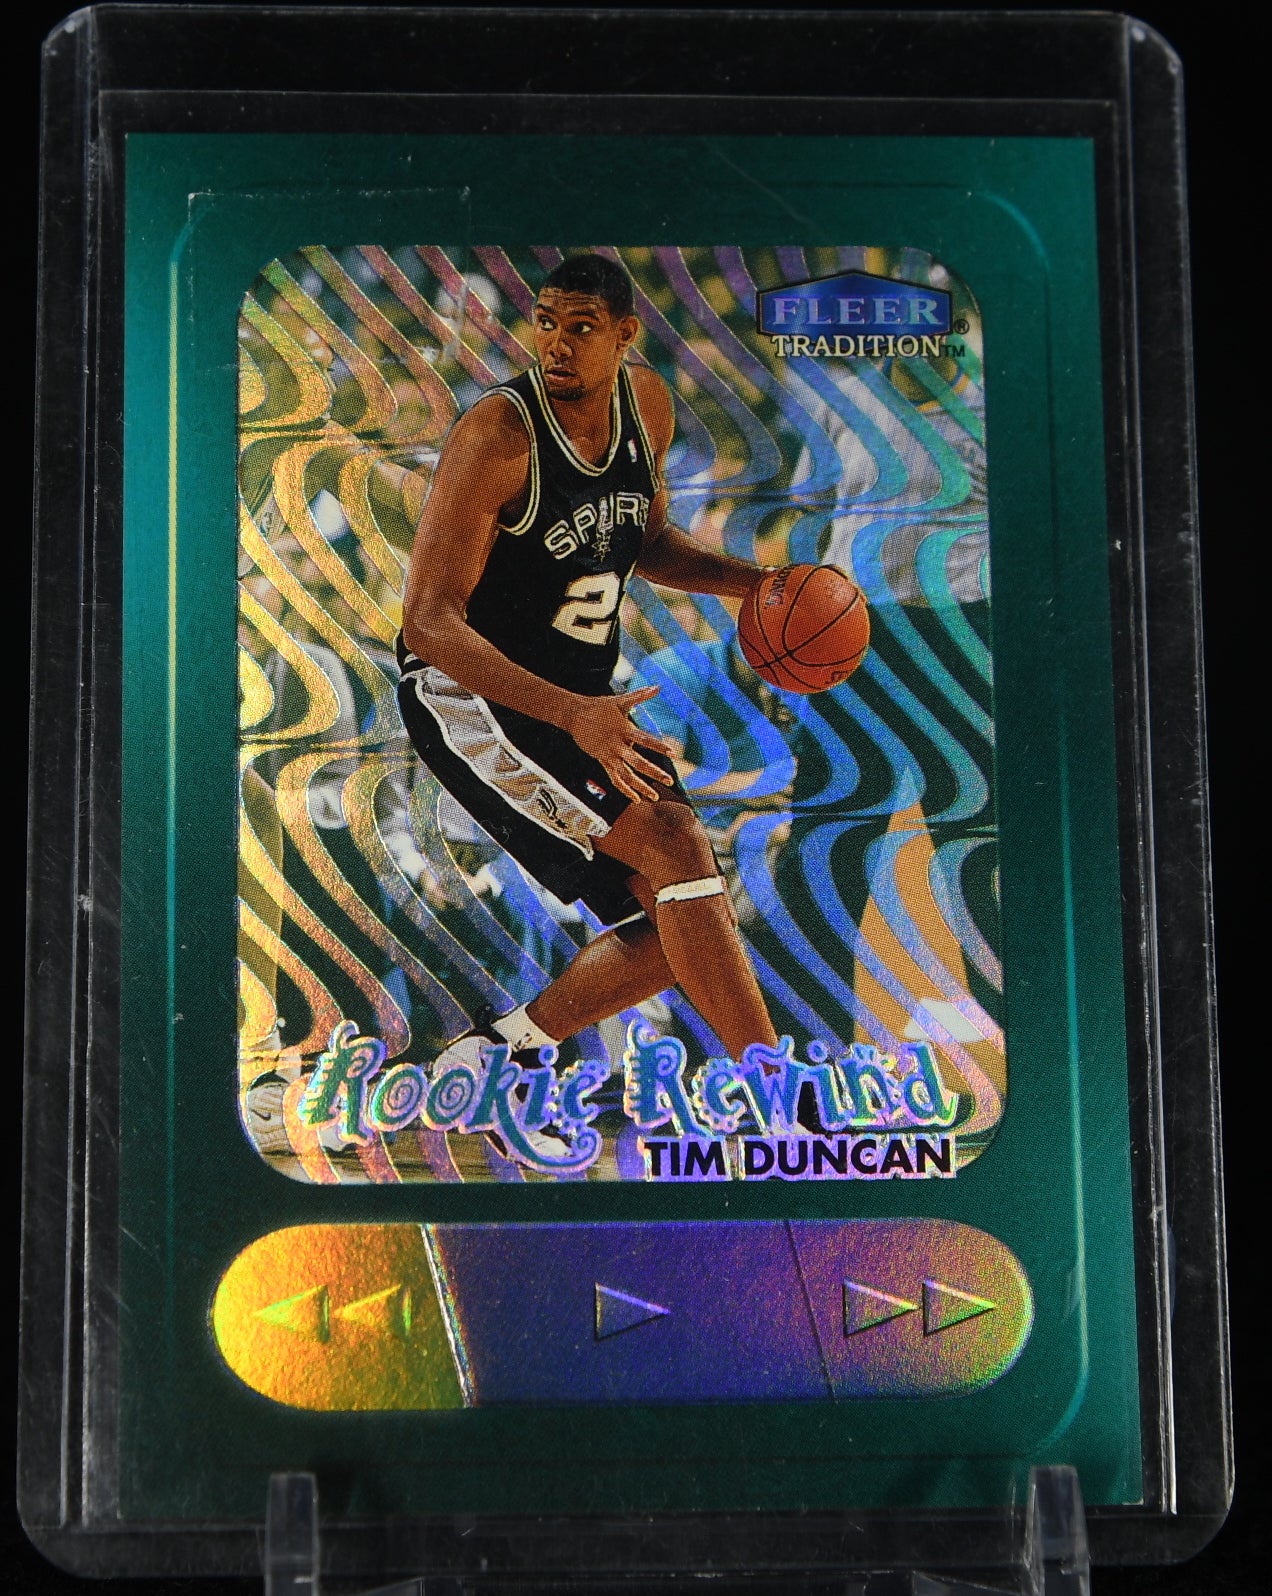 Word is that Tim Duncan signed with Panini so let us toast to the occasion!  : r/basketballcards